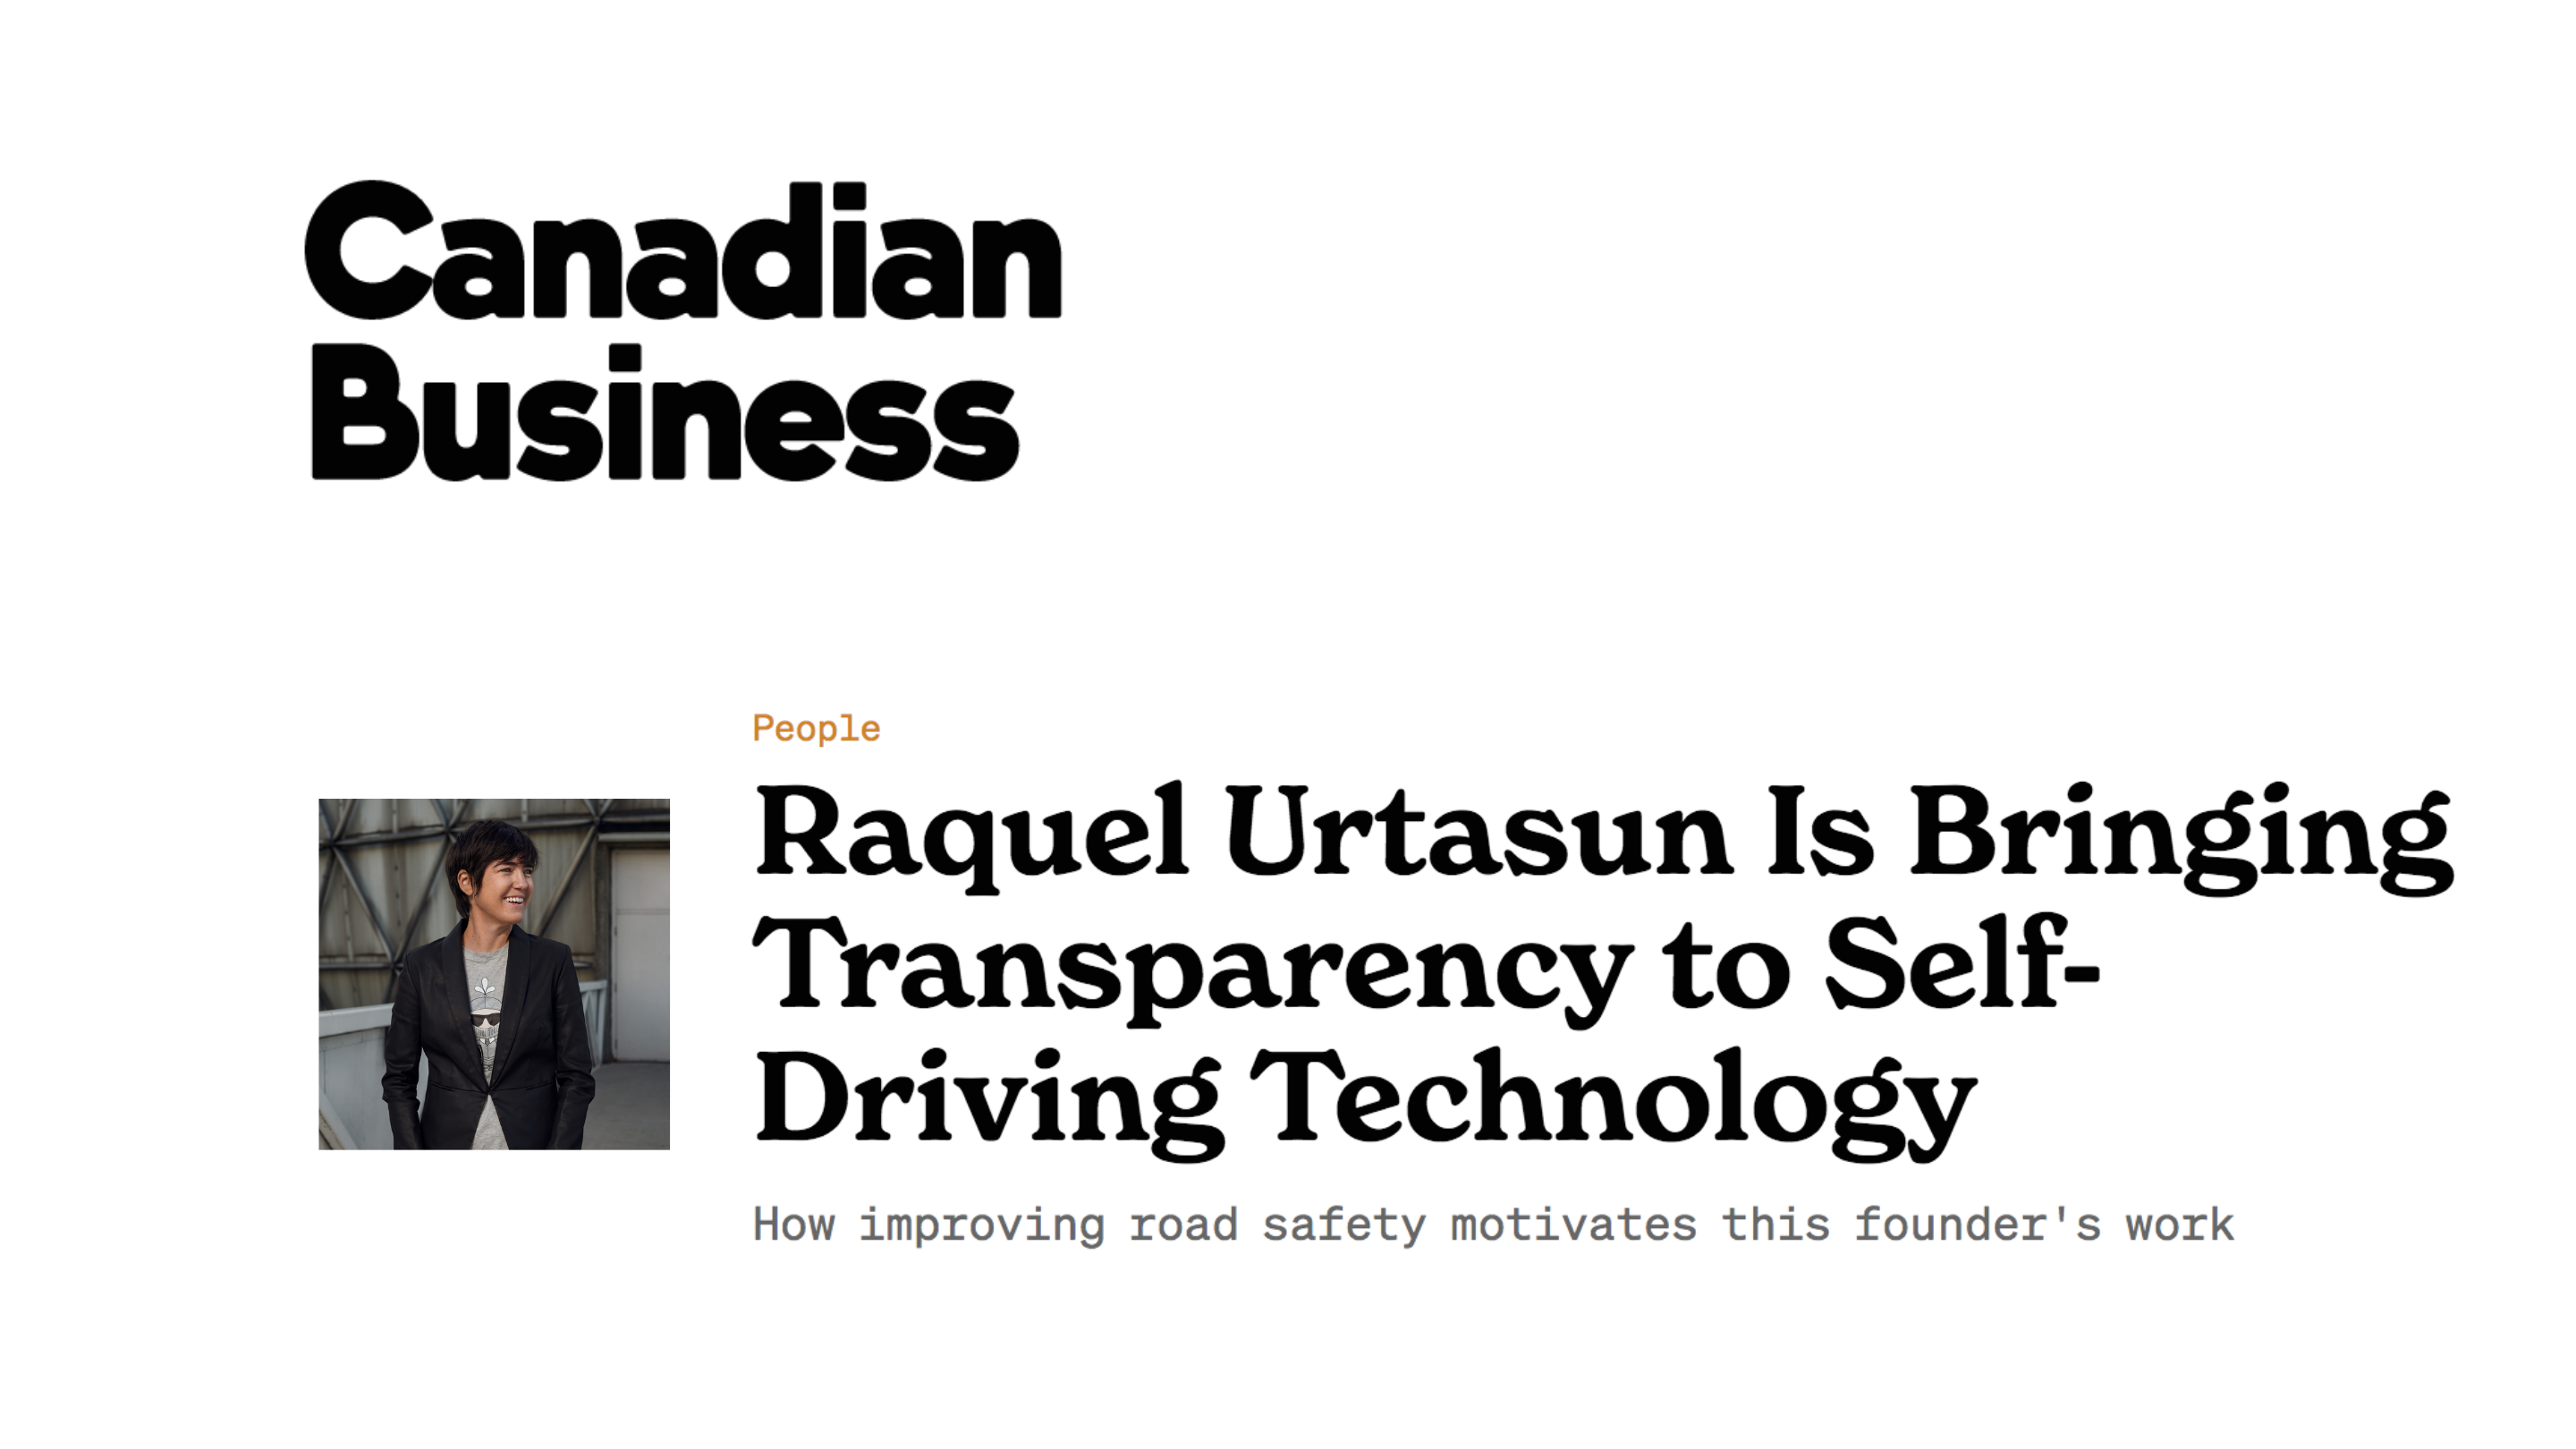 Canadian Business: Raquel Urtasun is Bringing Transparency to Self-Driving Technology